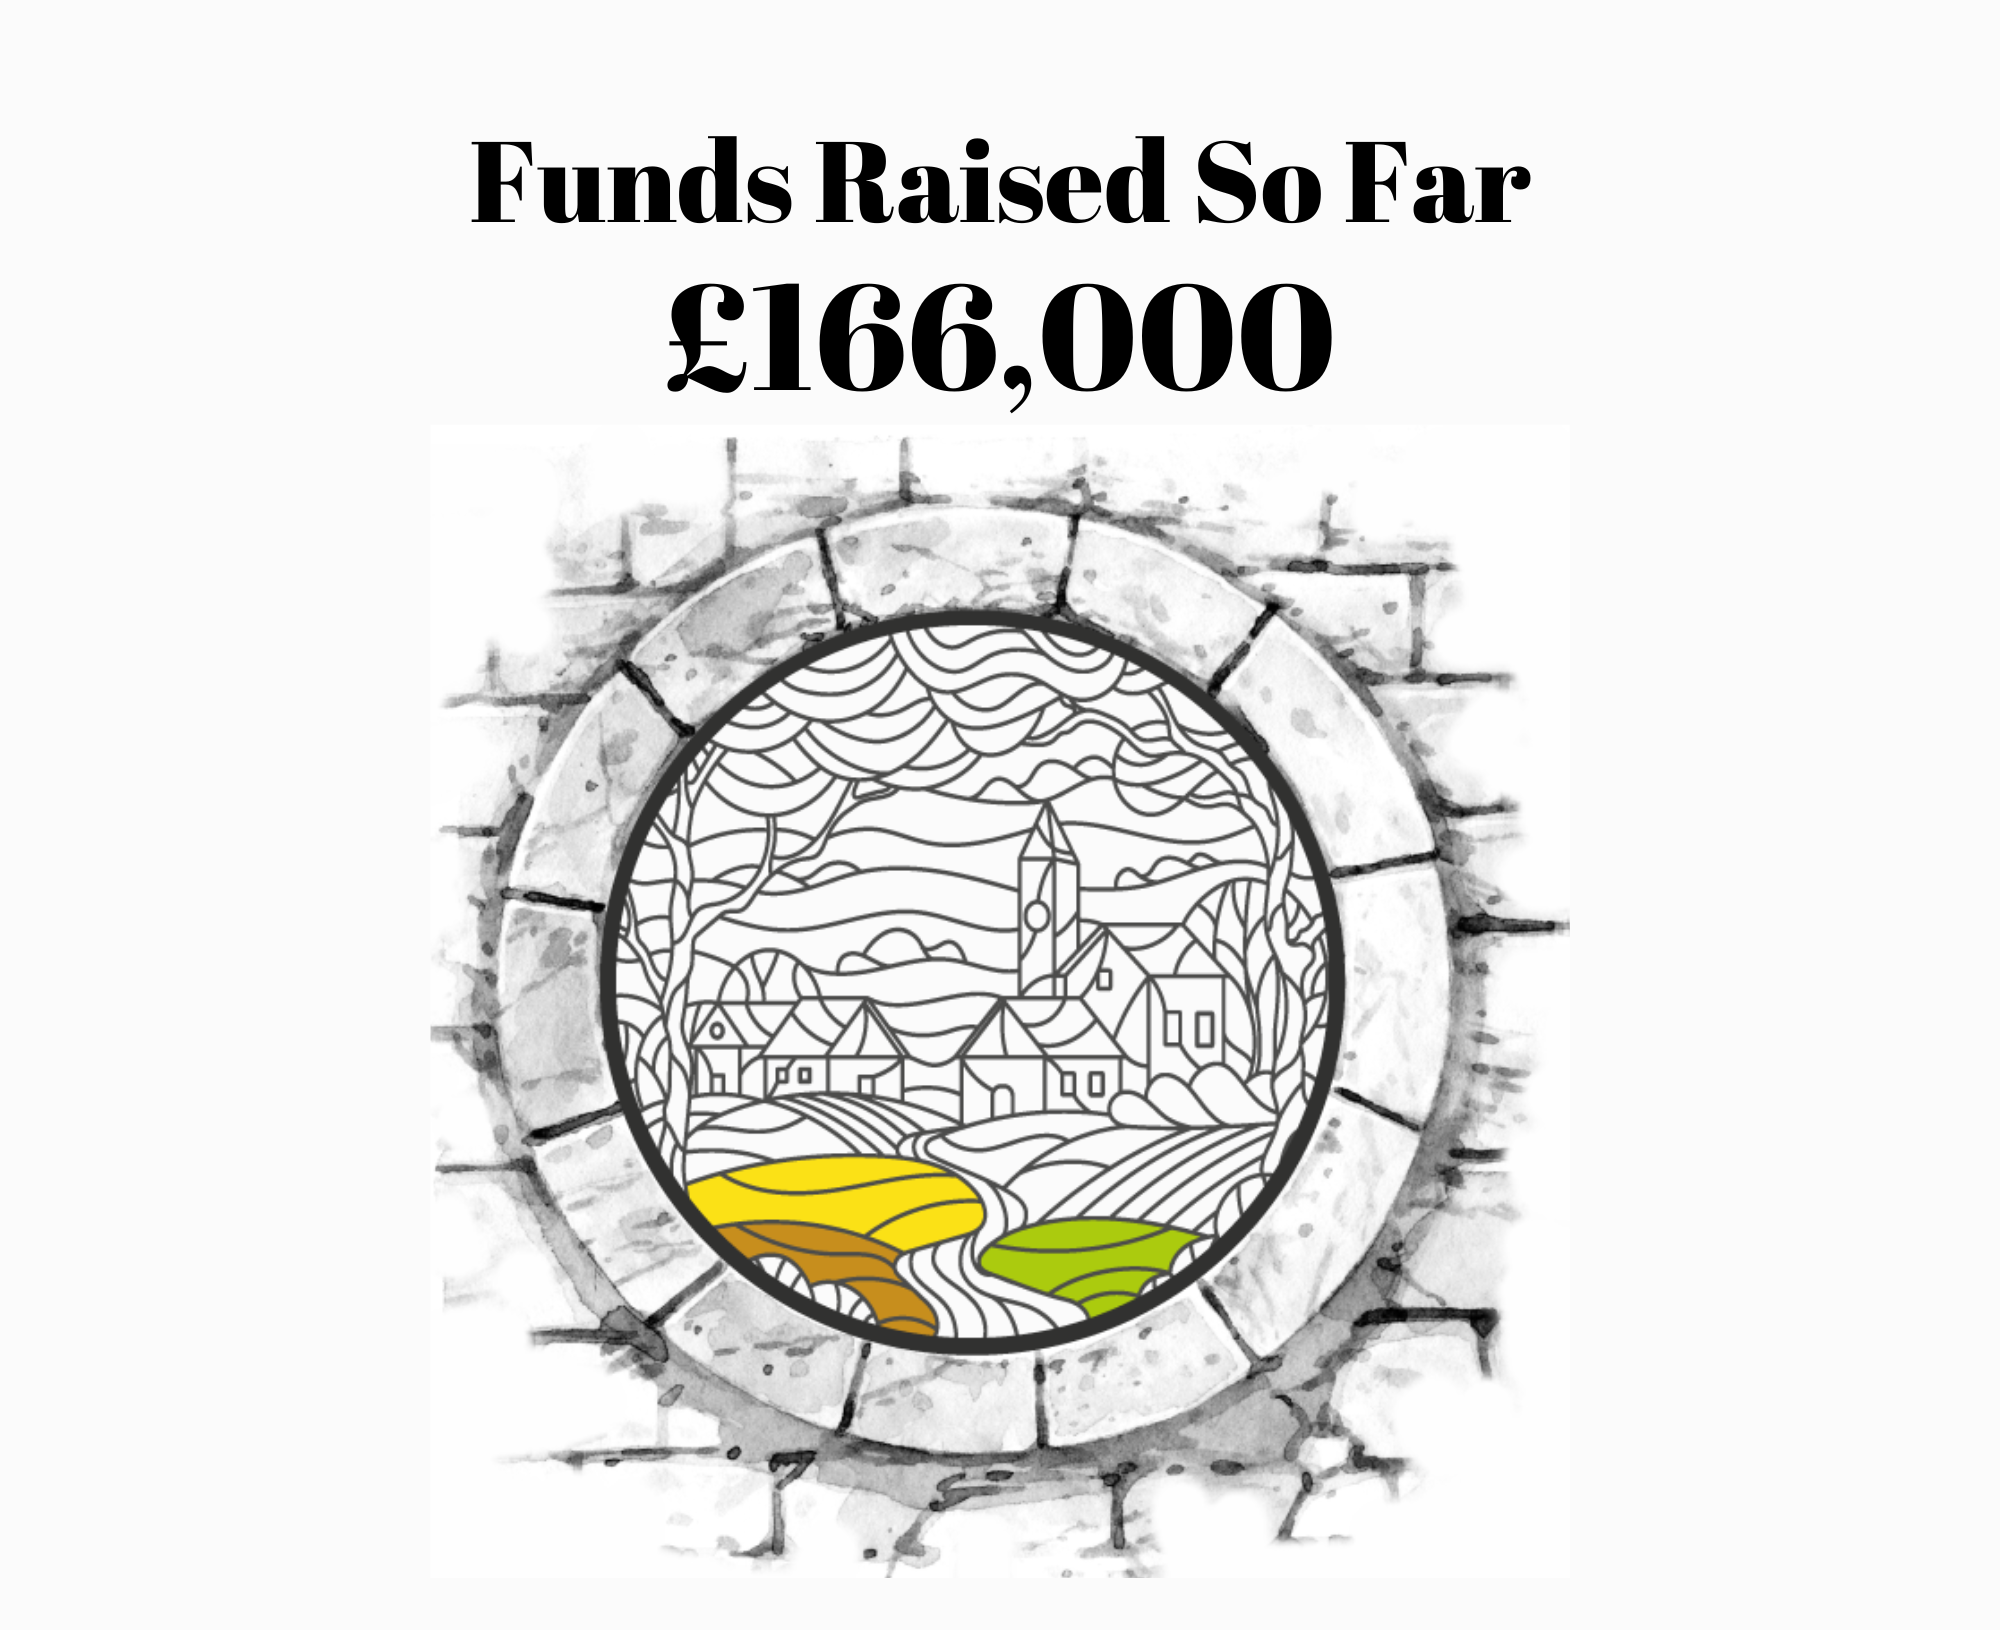 Stained glass window only partially coloured in with Funds Raised so far £157,000 above it